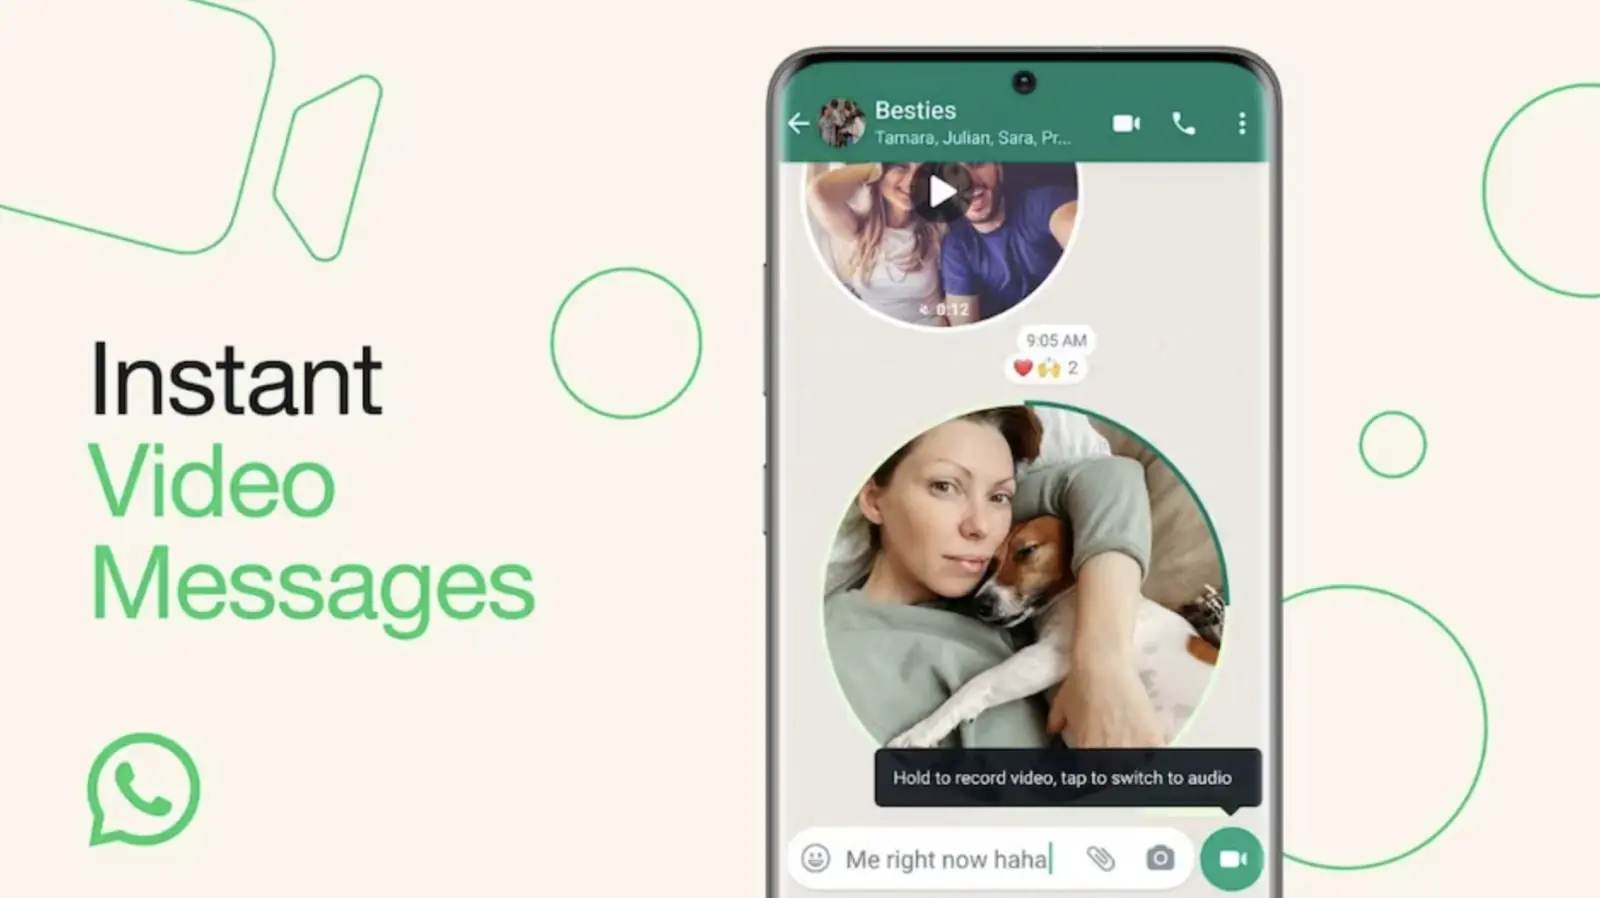 Another great feature coming in WhatsApp, sharing photos and videos will be easy